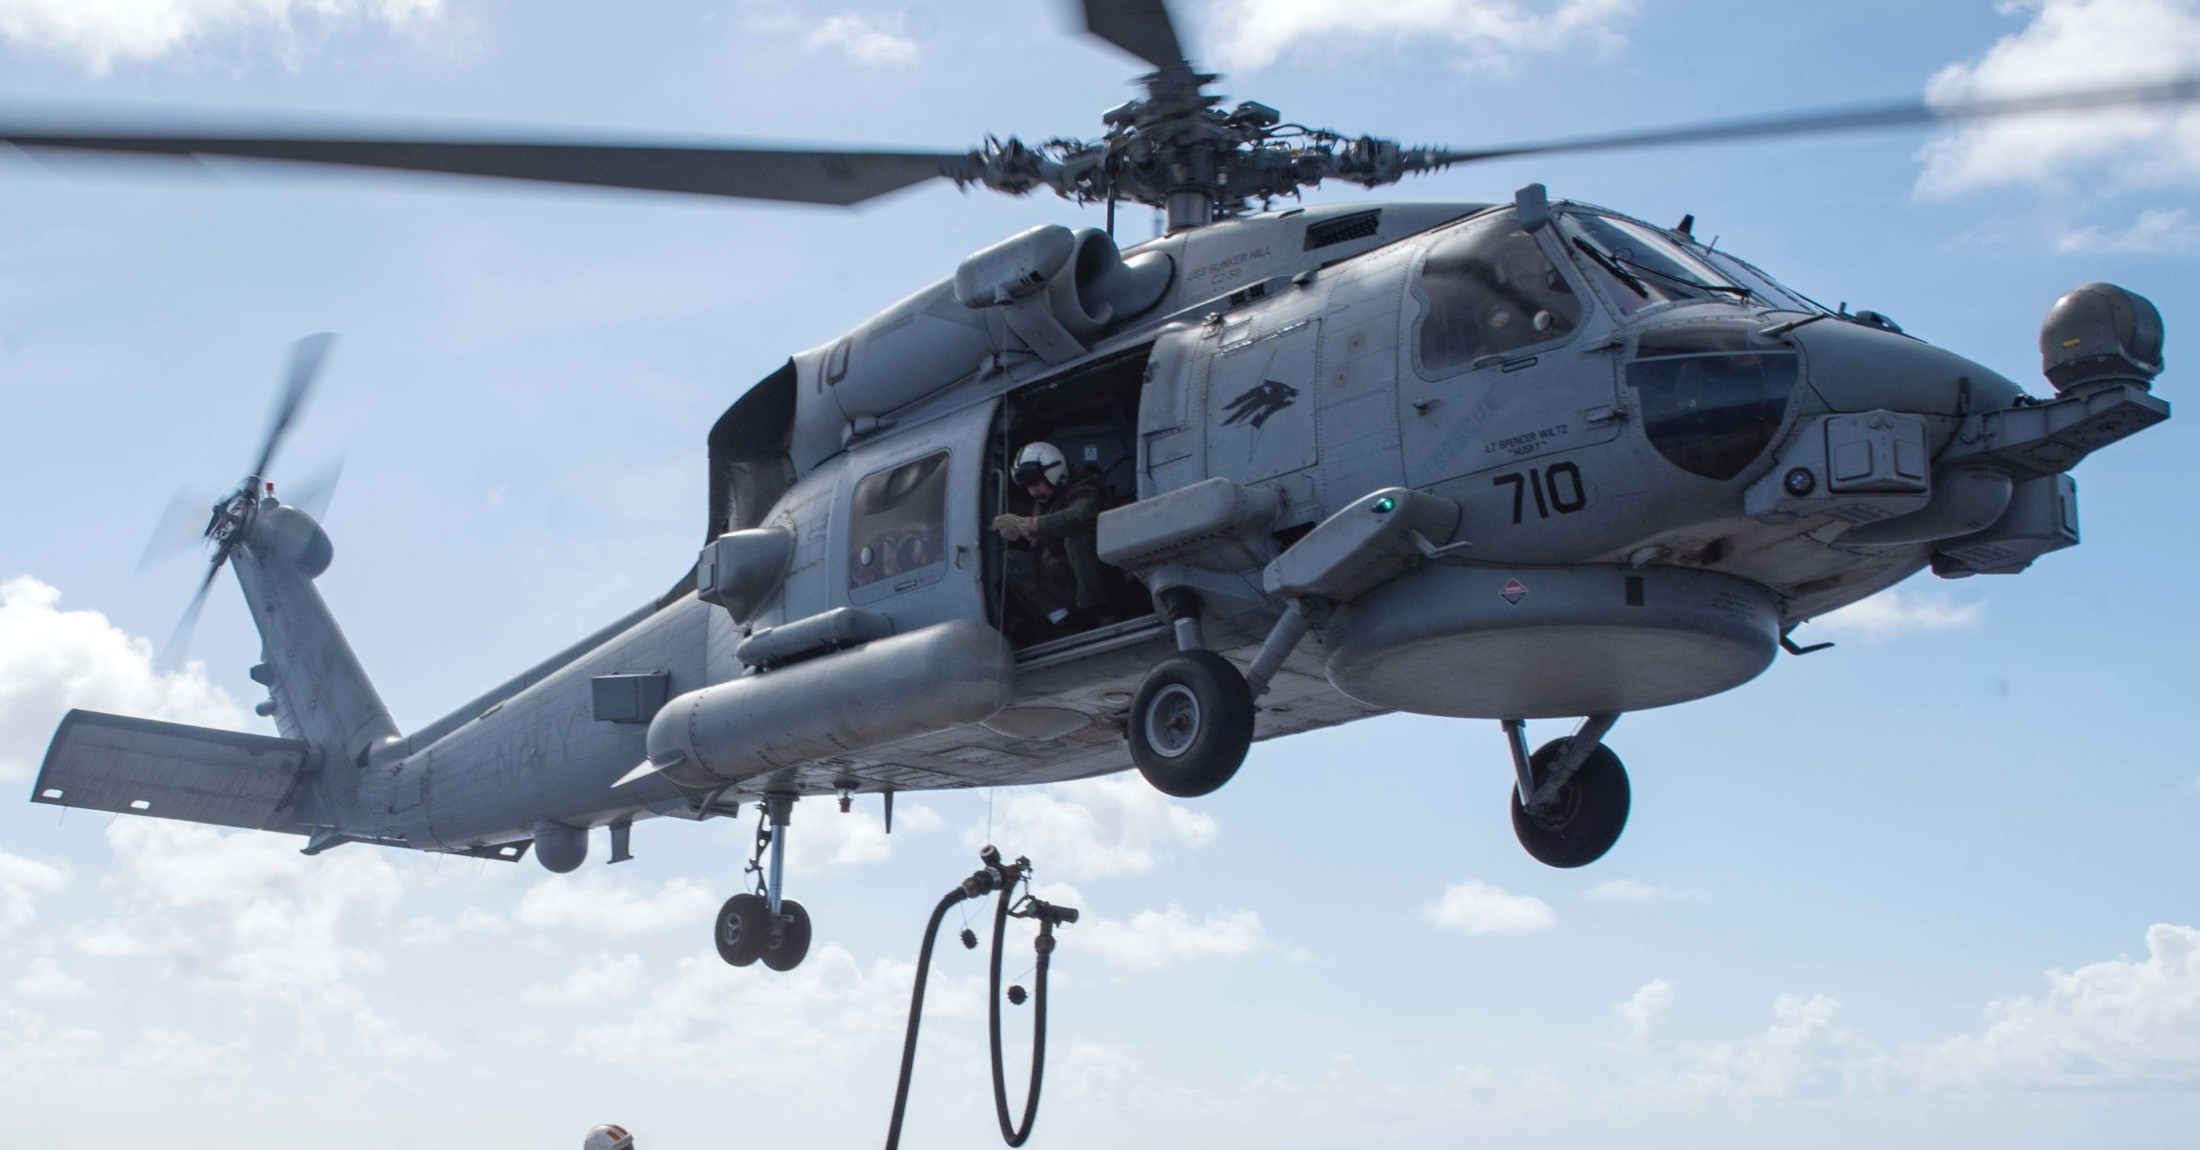 hsm-75 wolf pack helicopter maritime strike squadron mh-60r seahawk cg-52 uss bunker hill 83